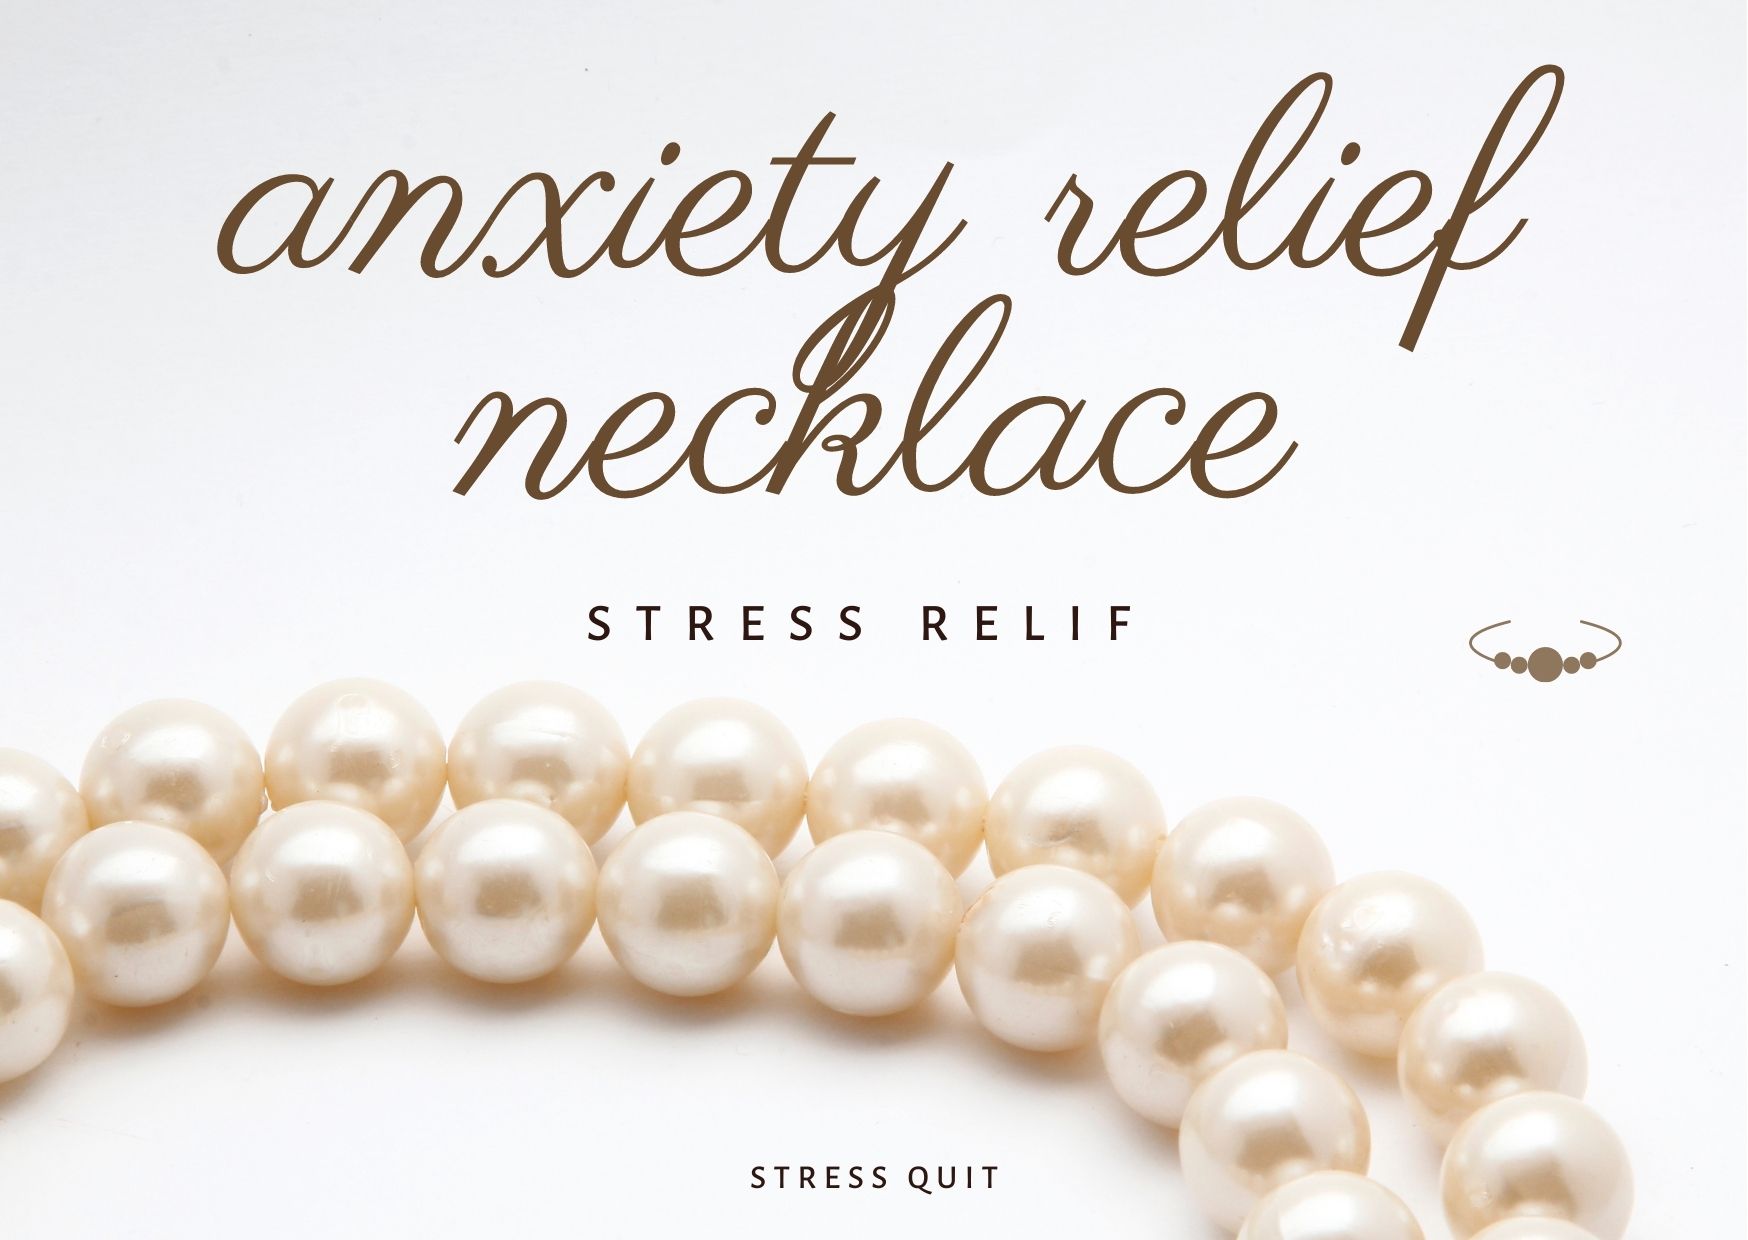 Find relief from anxiety with this unique necklace!